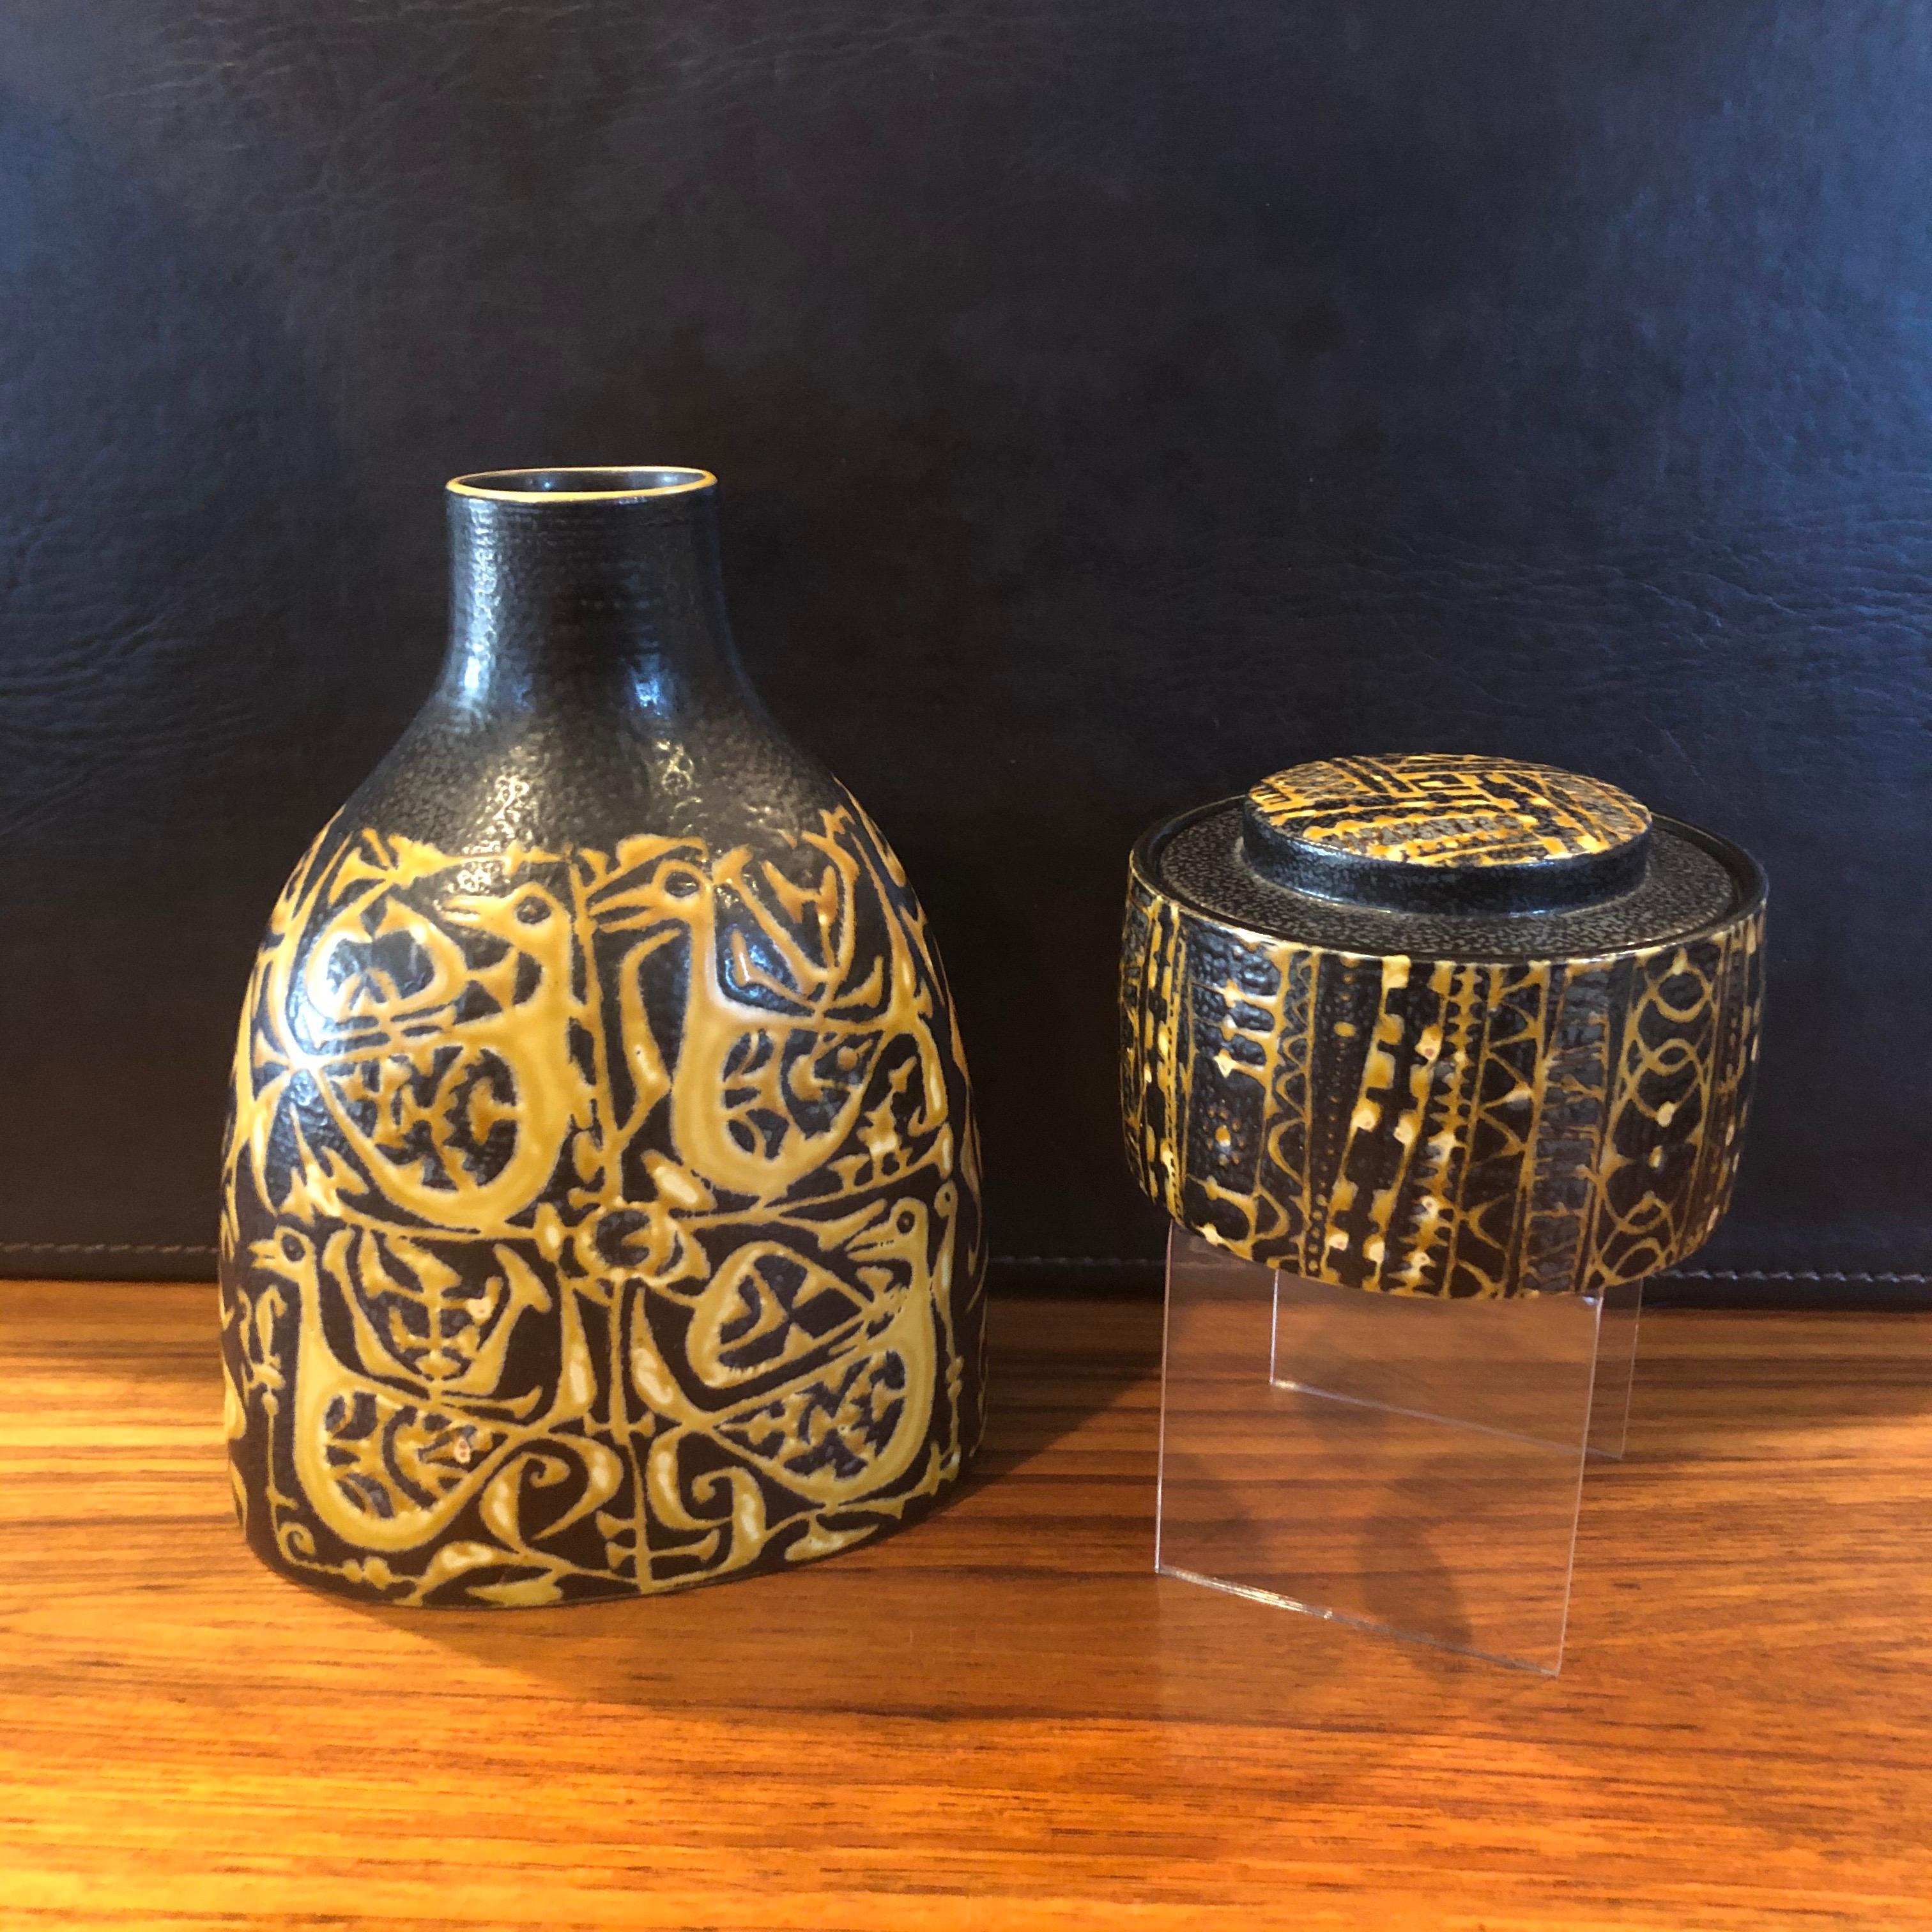 Wonderful Fajance lidded box and jar from the Baca line by Nils Thorsson for Royal Copenhagen, circa 1960s. The brown and yellow glazed stoneware containers with geometric abstract design was designed by Royal Copenhagen's renowned artistic